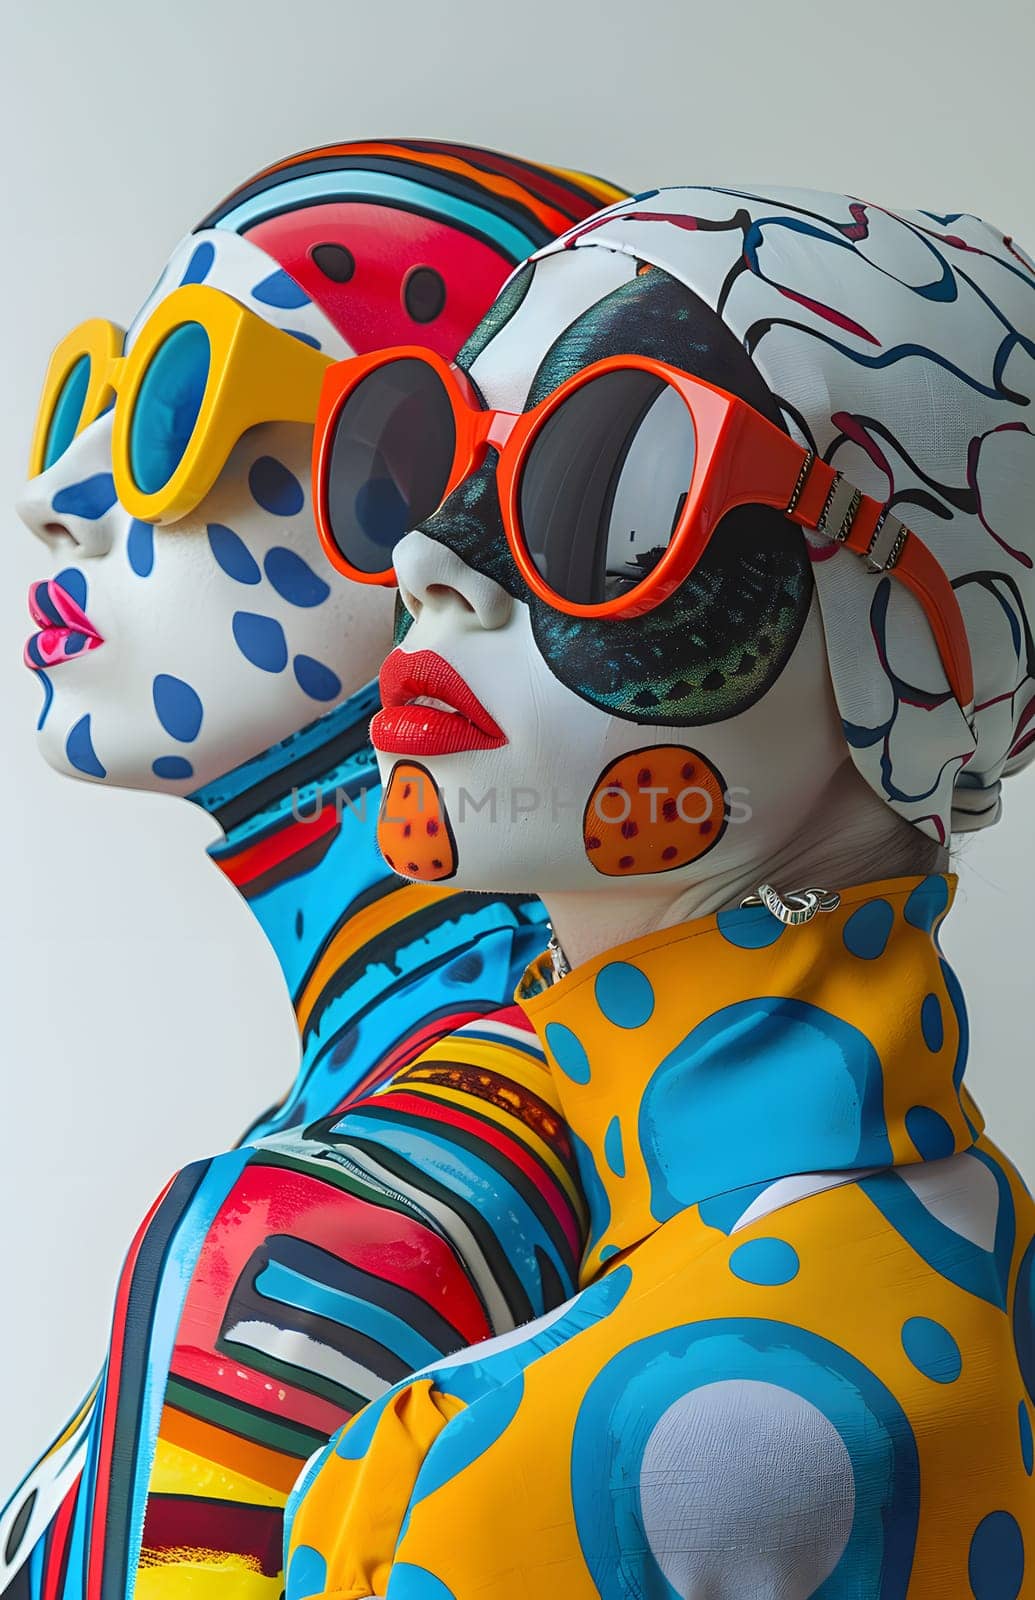 Two vibrant mannequins wearing colorful swim caps and sunglasses are standing together, showcasing a mix of art, headgear, and eyewear in electric blue and bold patterns